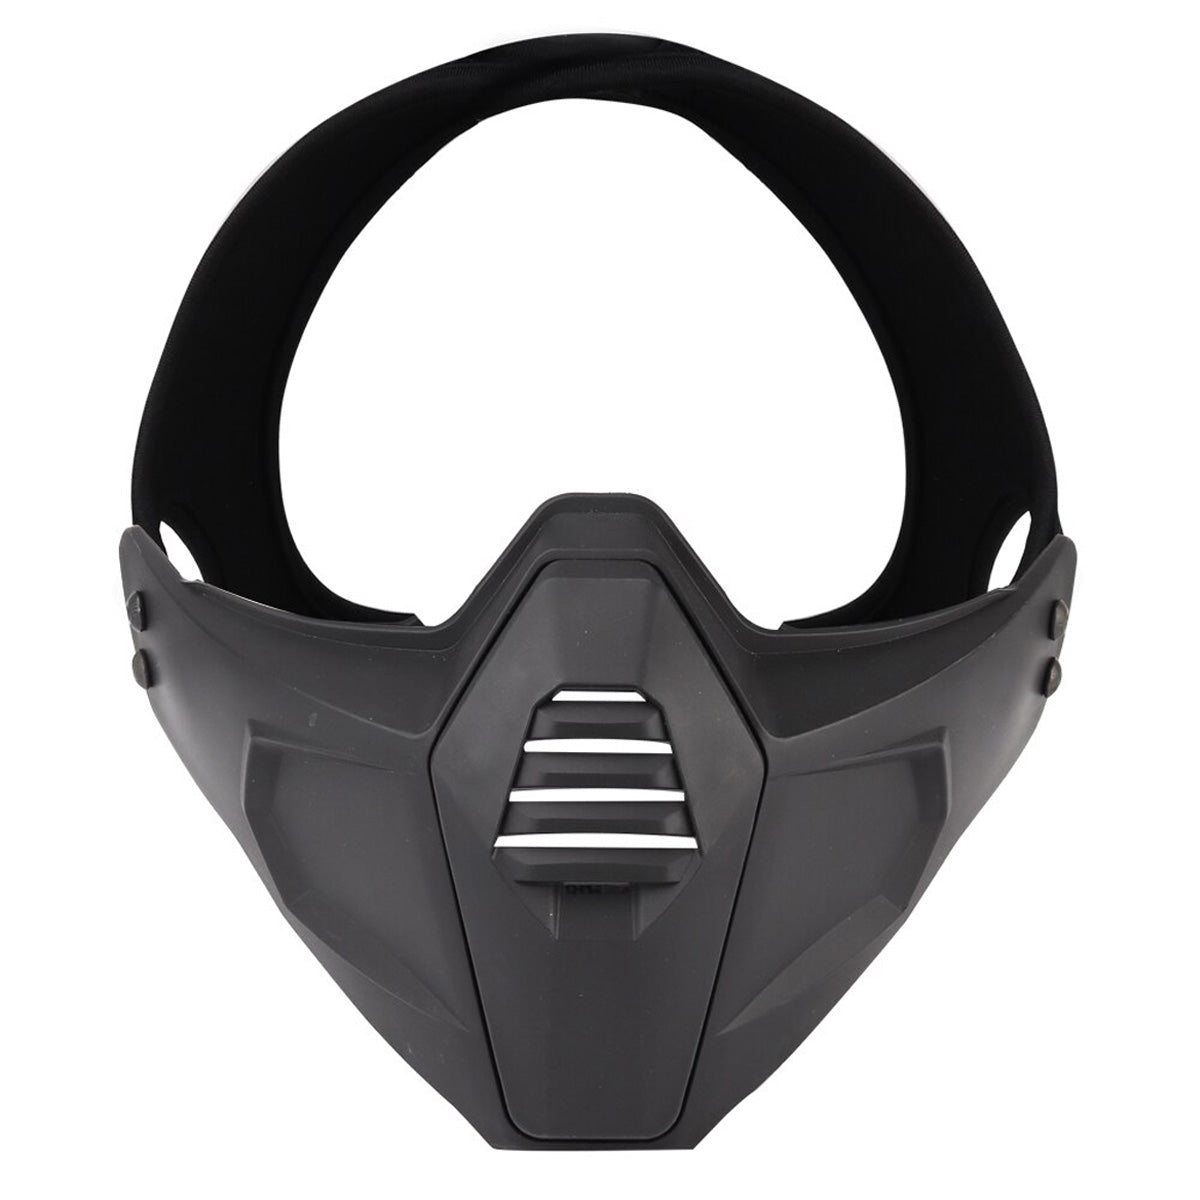 WOSPORT TACTICAL MULTIDIMENTIONAL SPLIT TYPE MASK FOR AIRSOFT